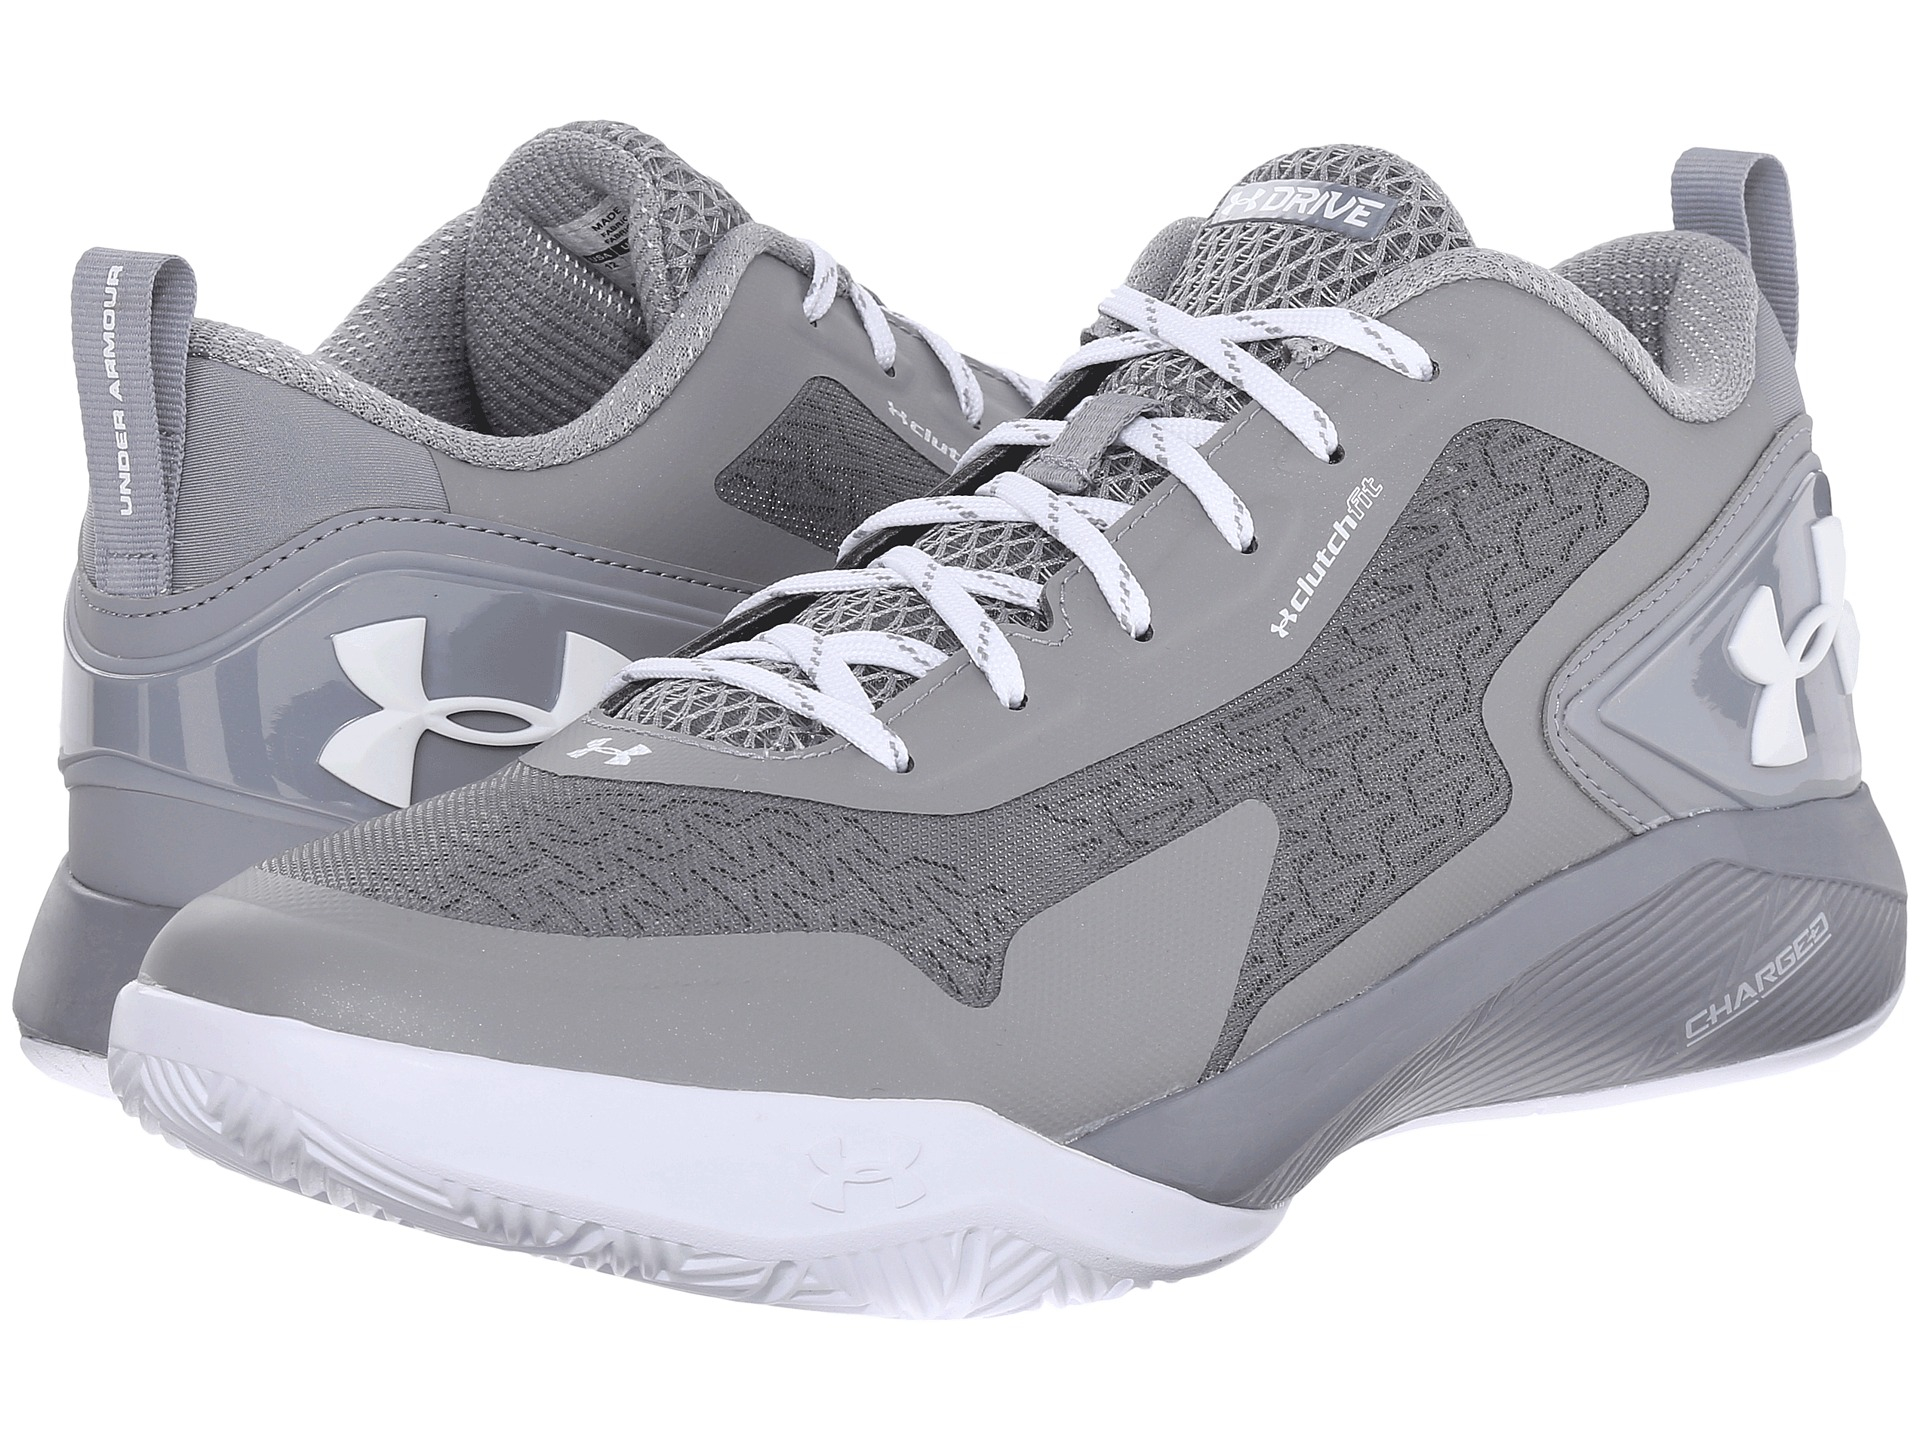 Under Armour Ua Clutchfit™ Drive 2 Low in Steel/White (Gray) for Men - Lyst